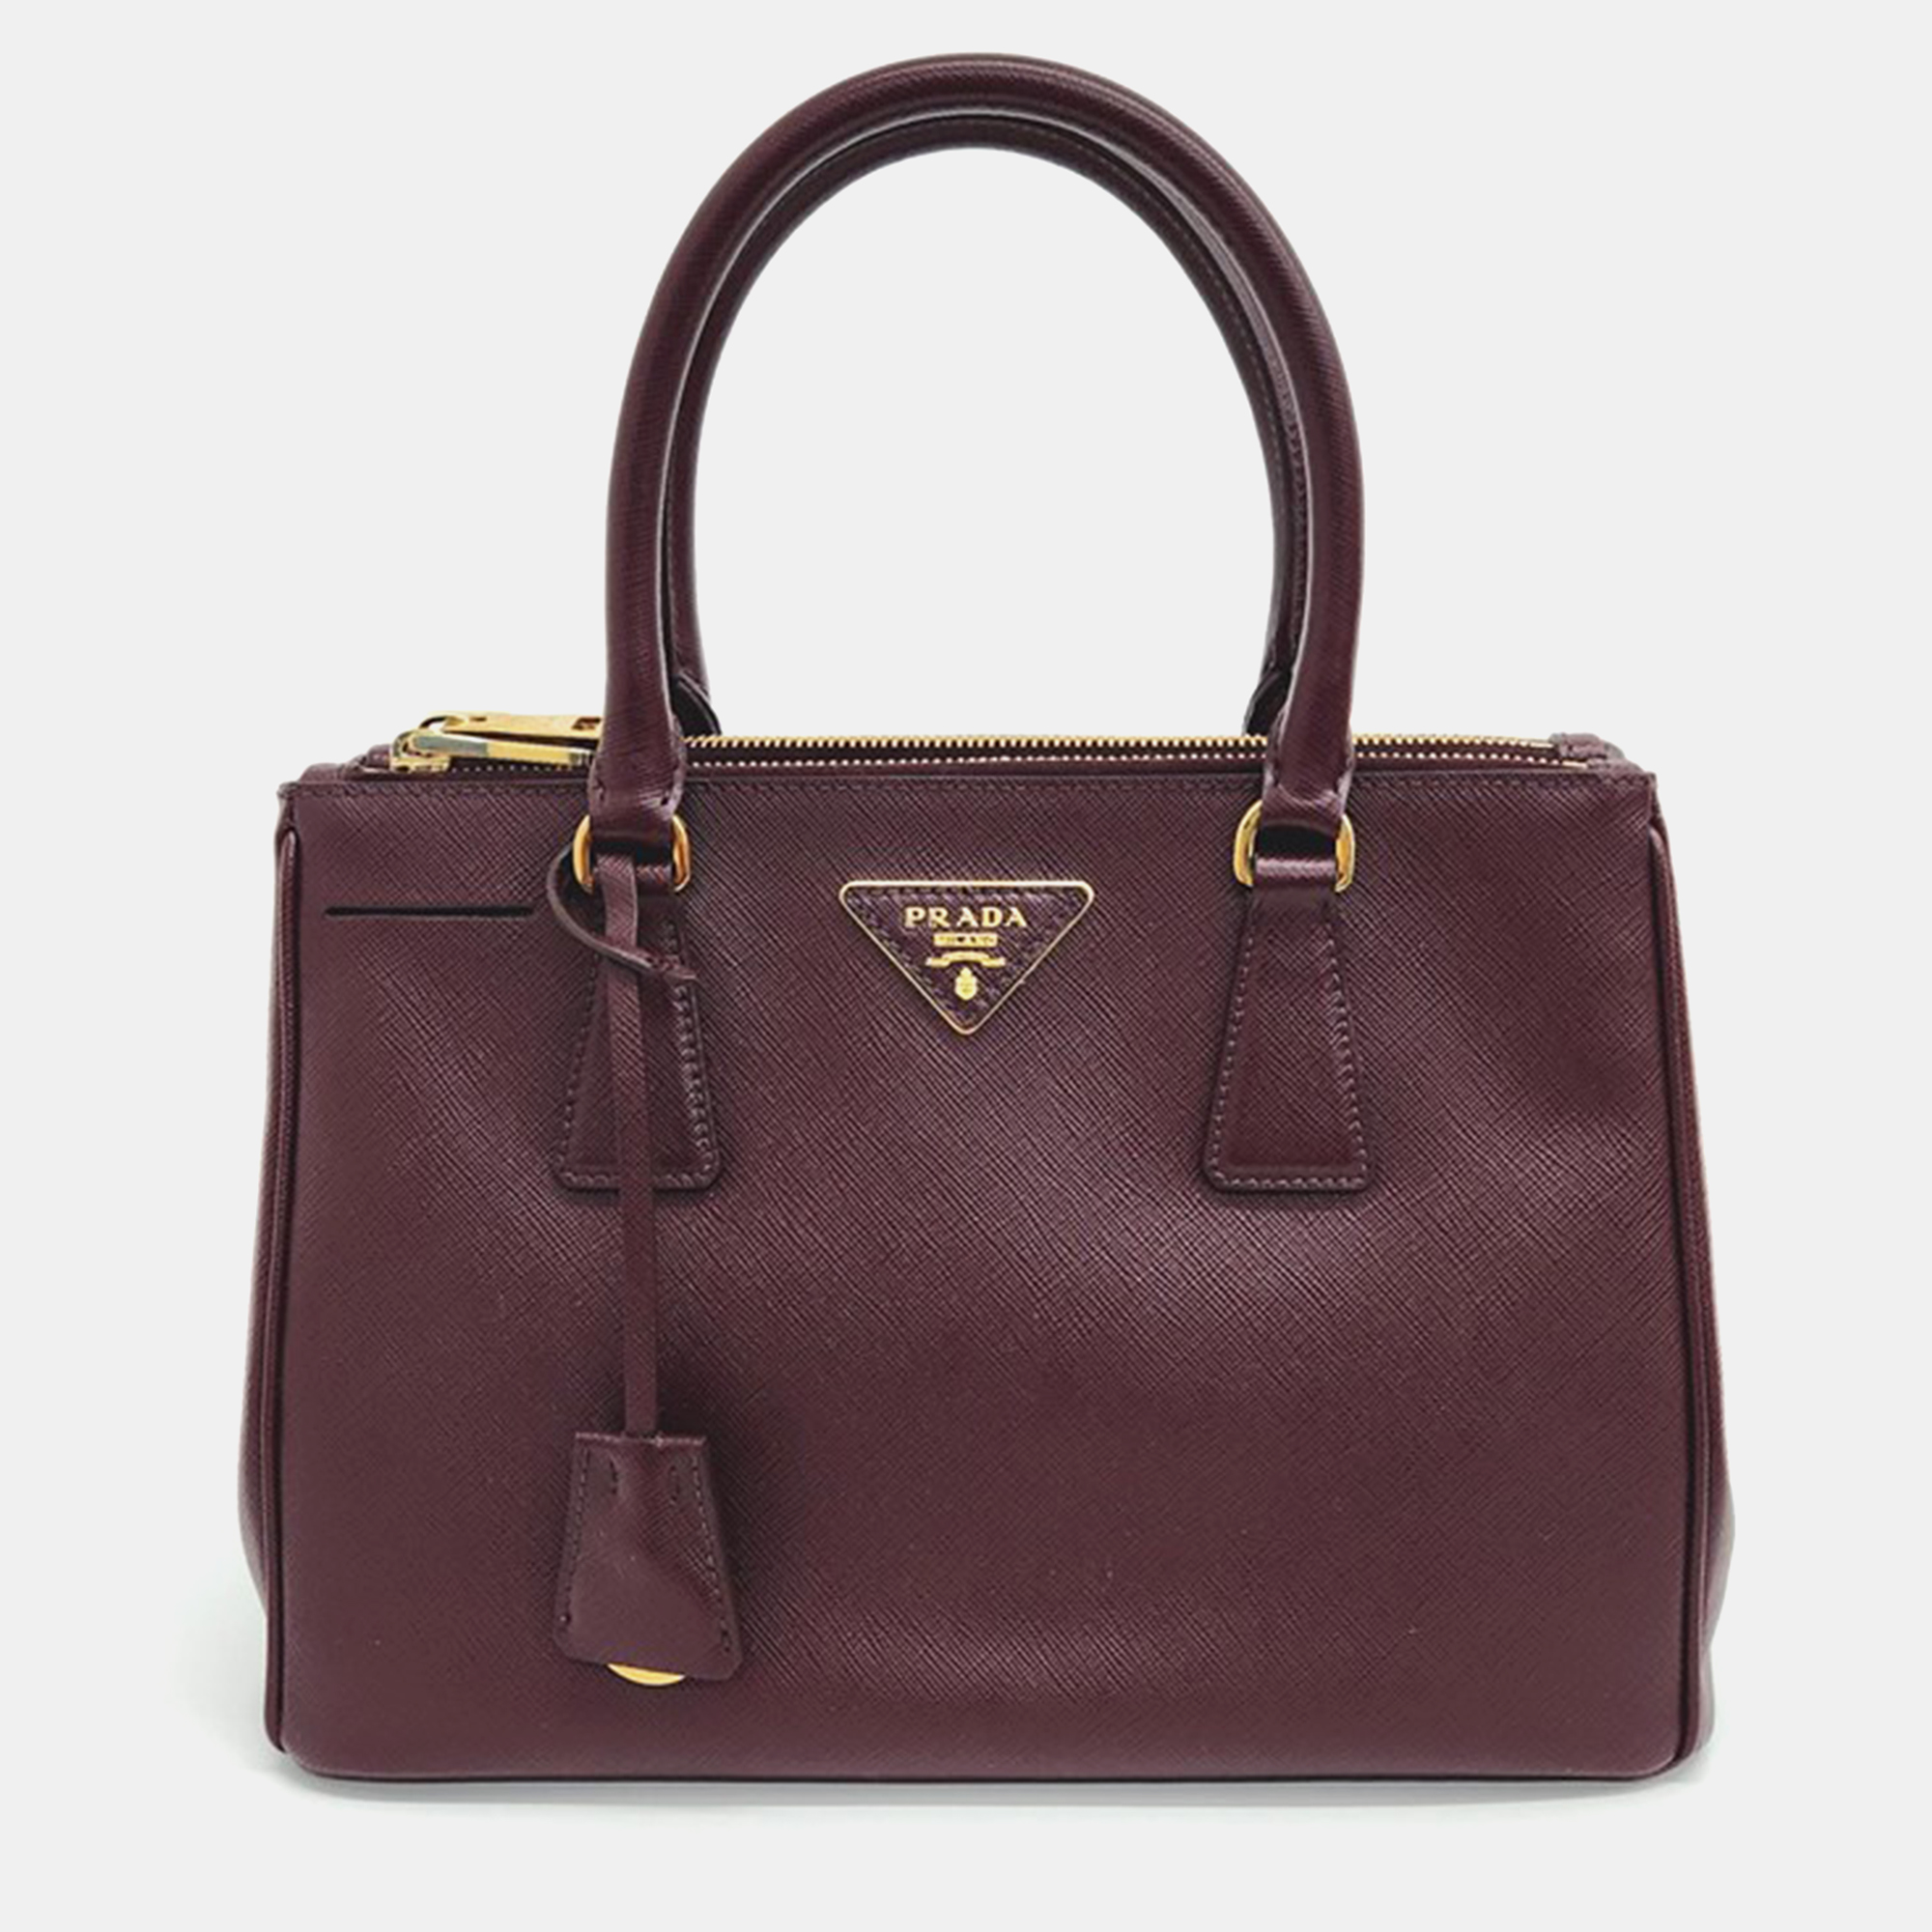 Pre-owned Prada Burgundy Leather Saffiano Lux Tote Bag